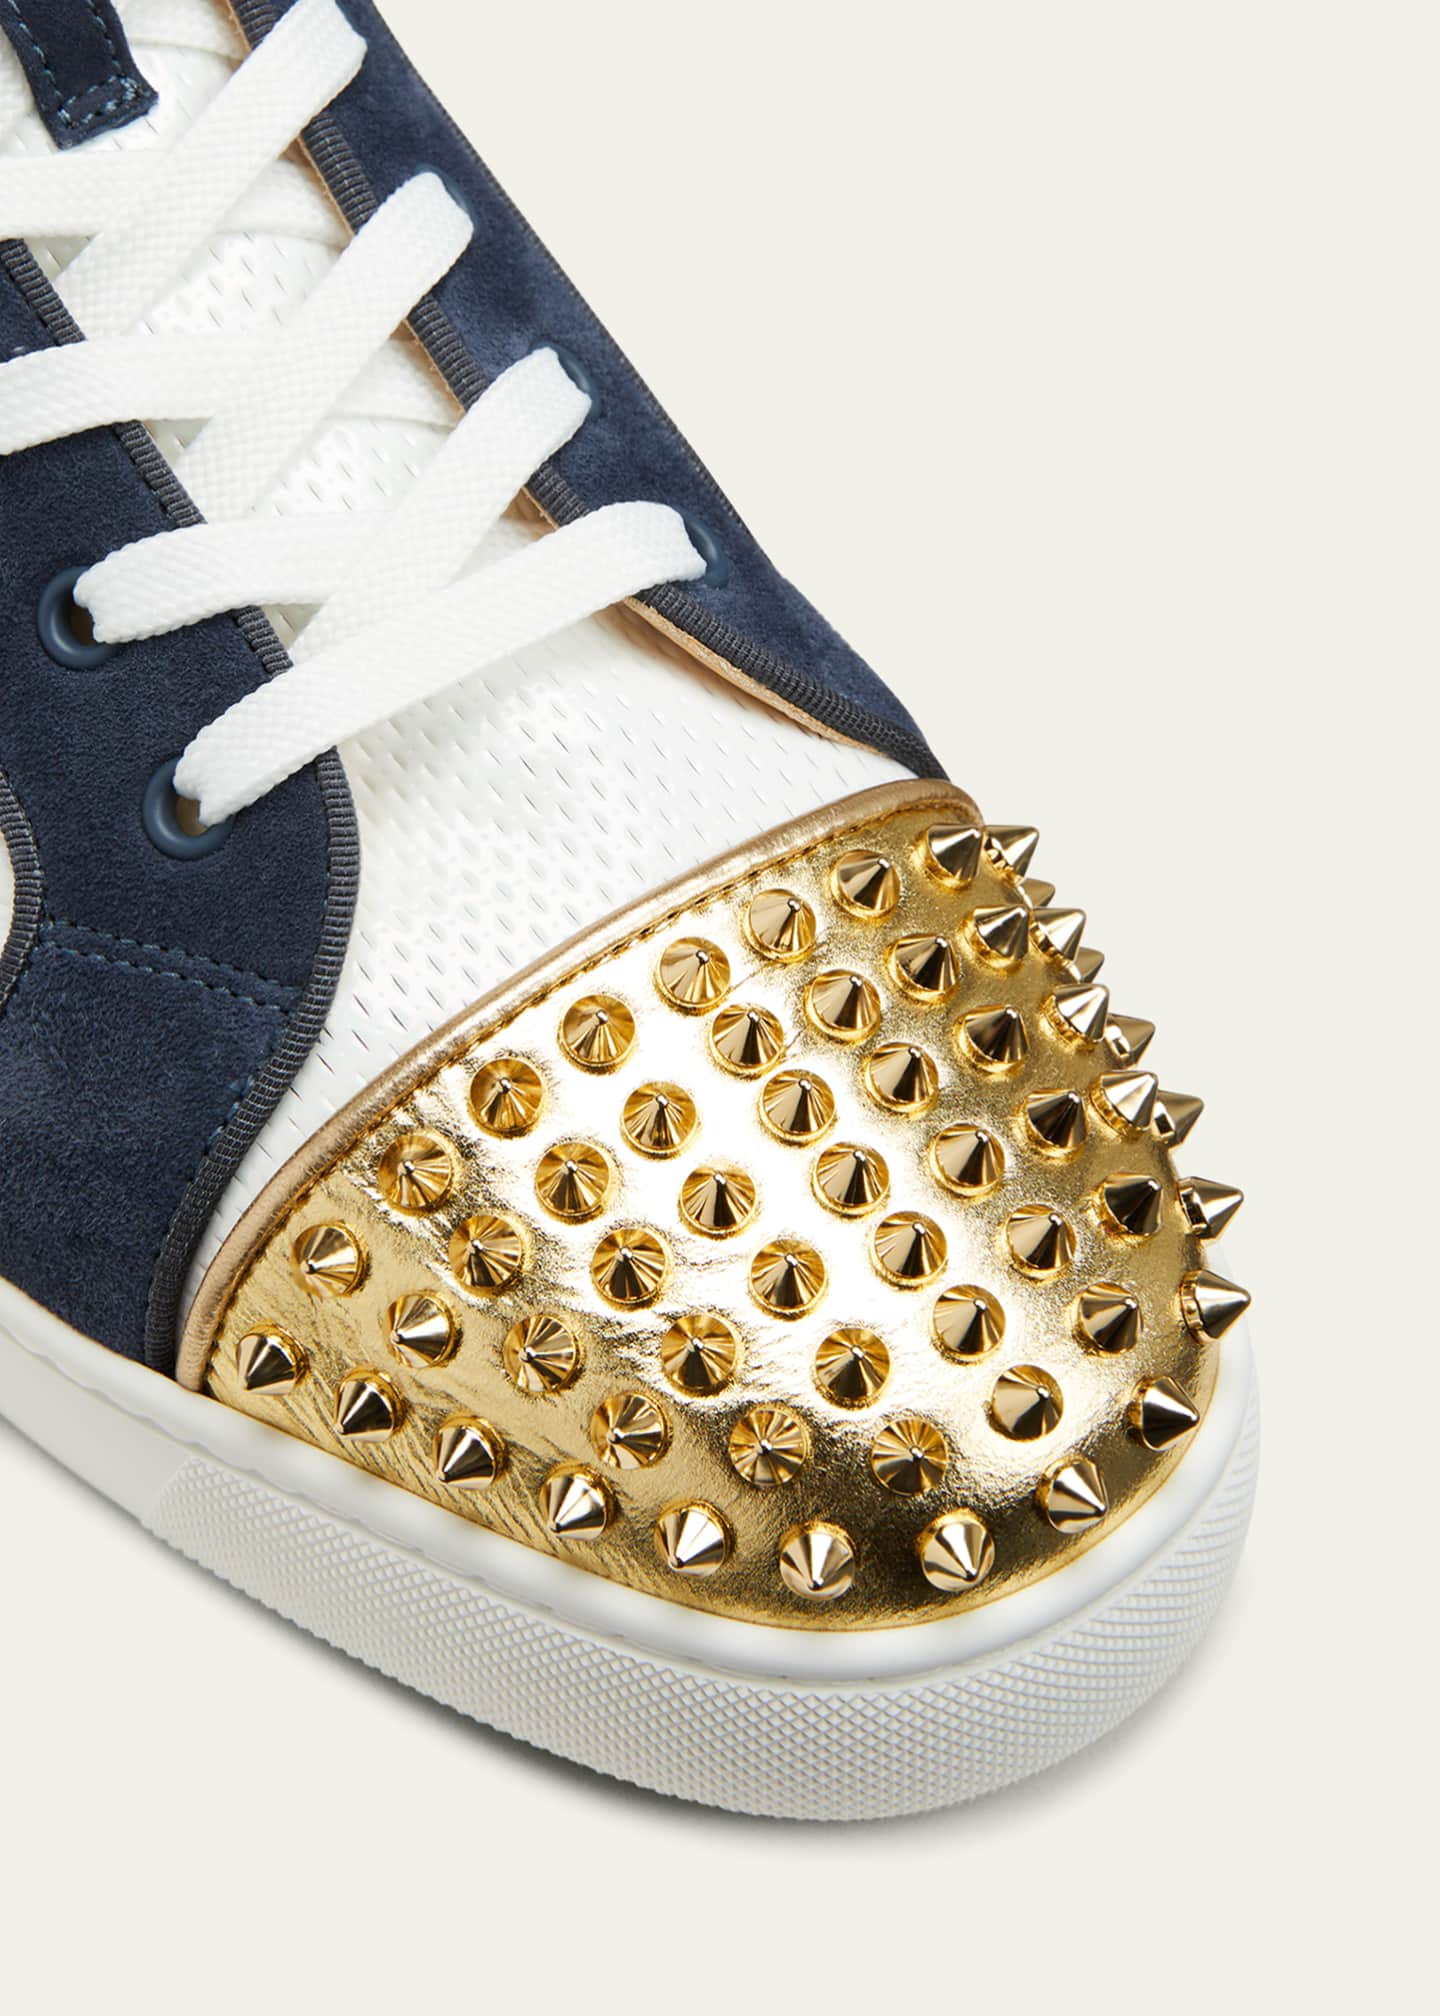 Lou Spikes Orlato Sneakers in Blue - Christian Louboutin